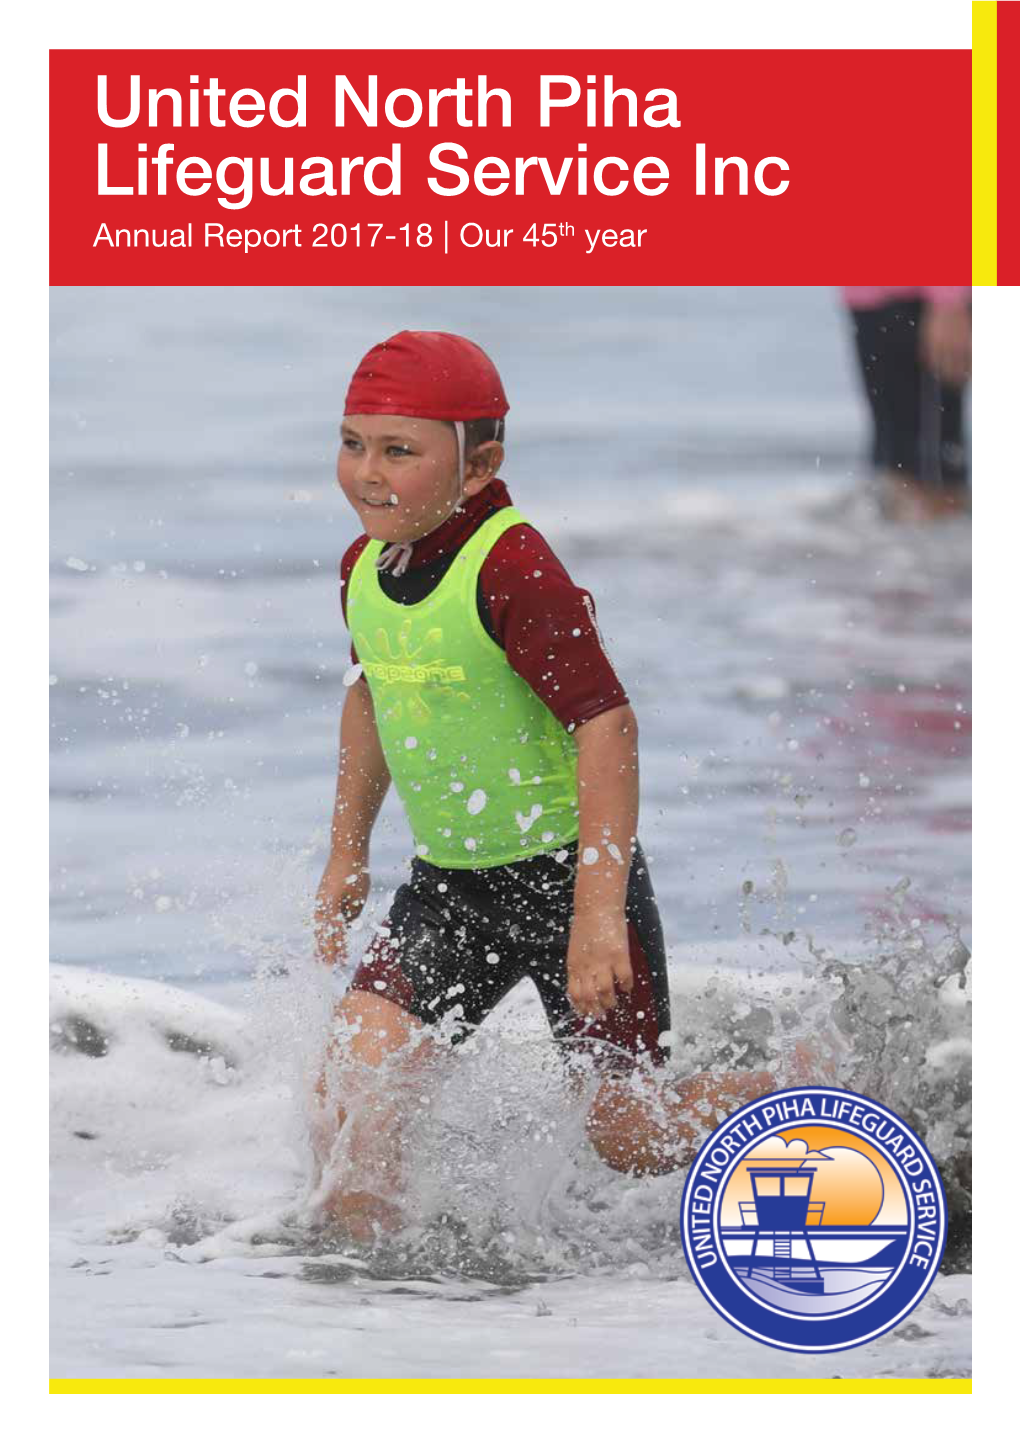 United North Piha Lifeguard Service Inc Annual Report 2017-18 | Our 45Th Year on the Cover: Junior Surf